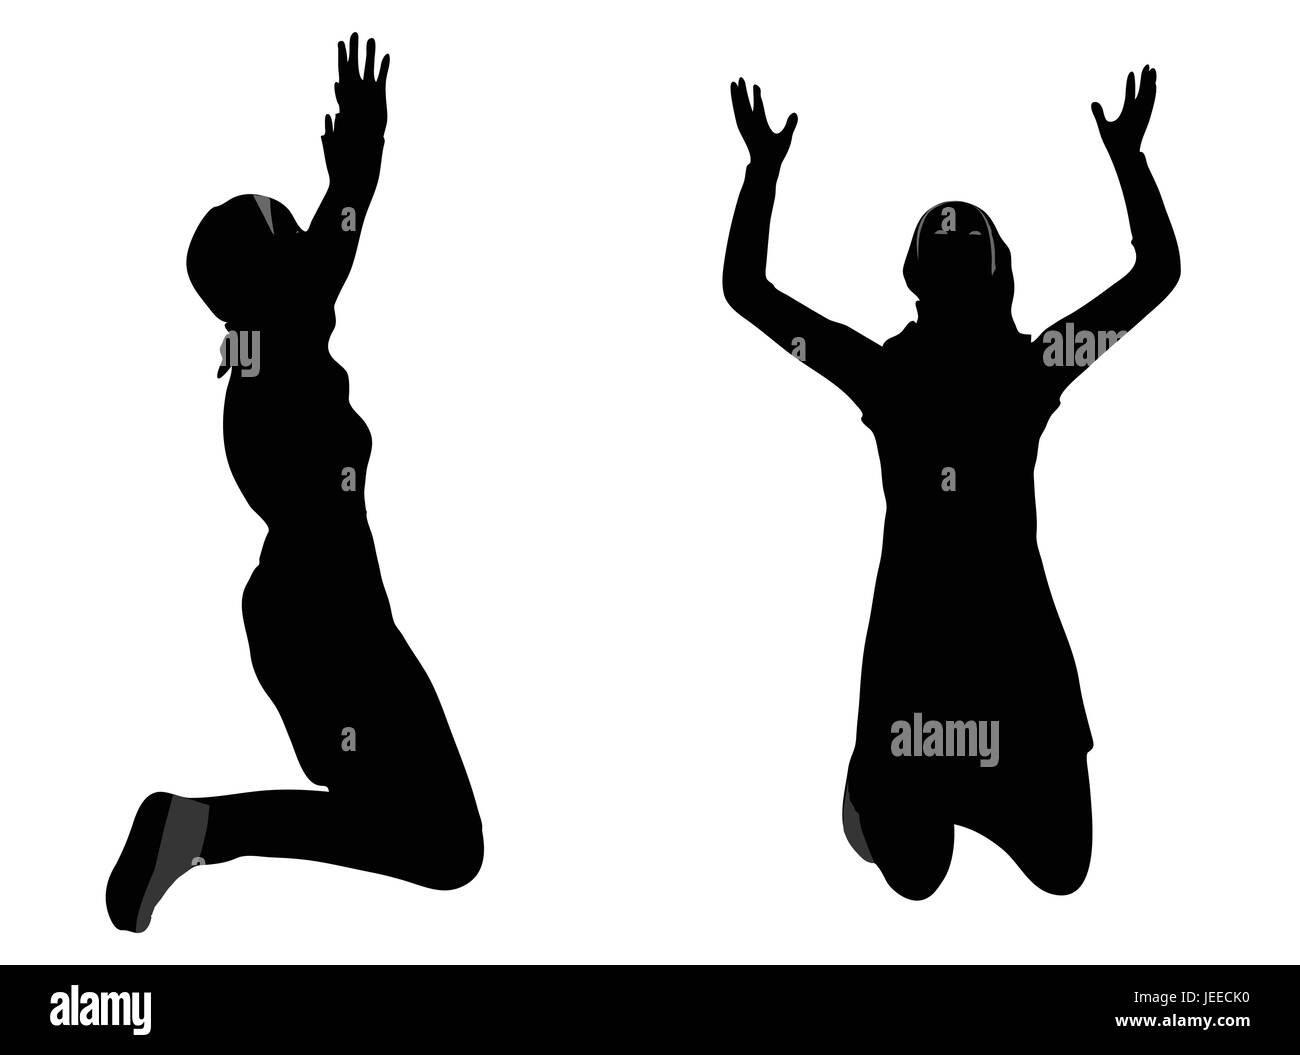 EPS 10 vector illustration of Muslim woman silhouette in pray pose Stock Vector